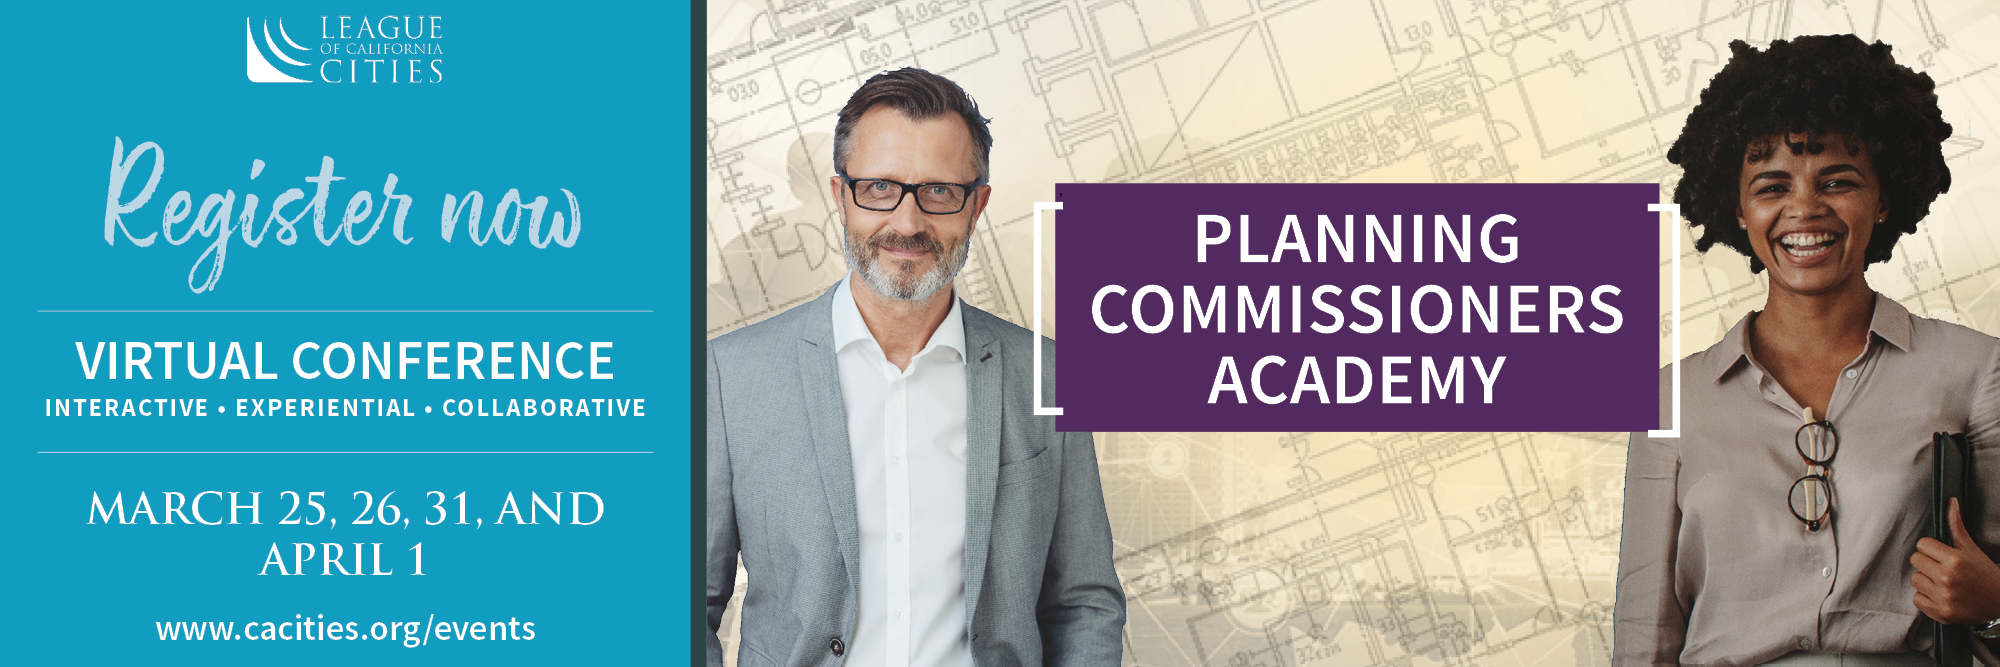 Planning Commissioners Academy register now